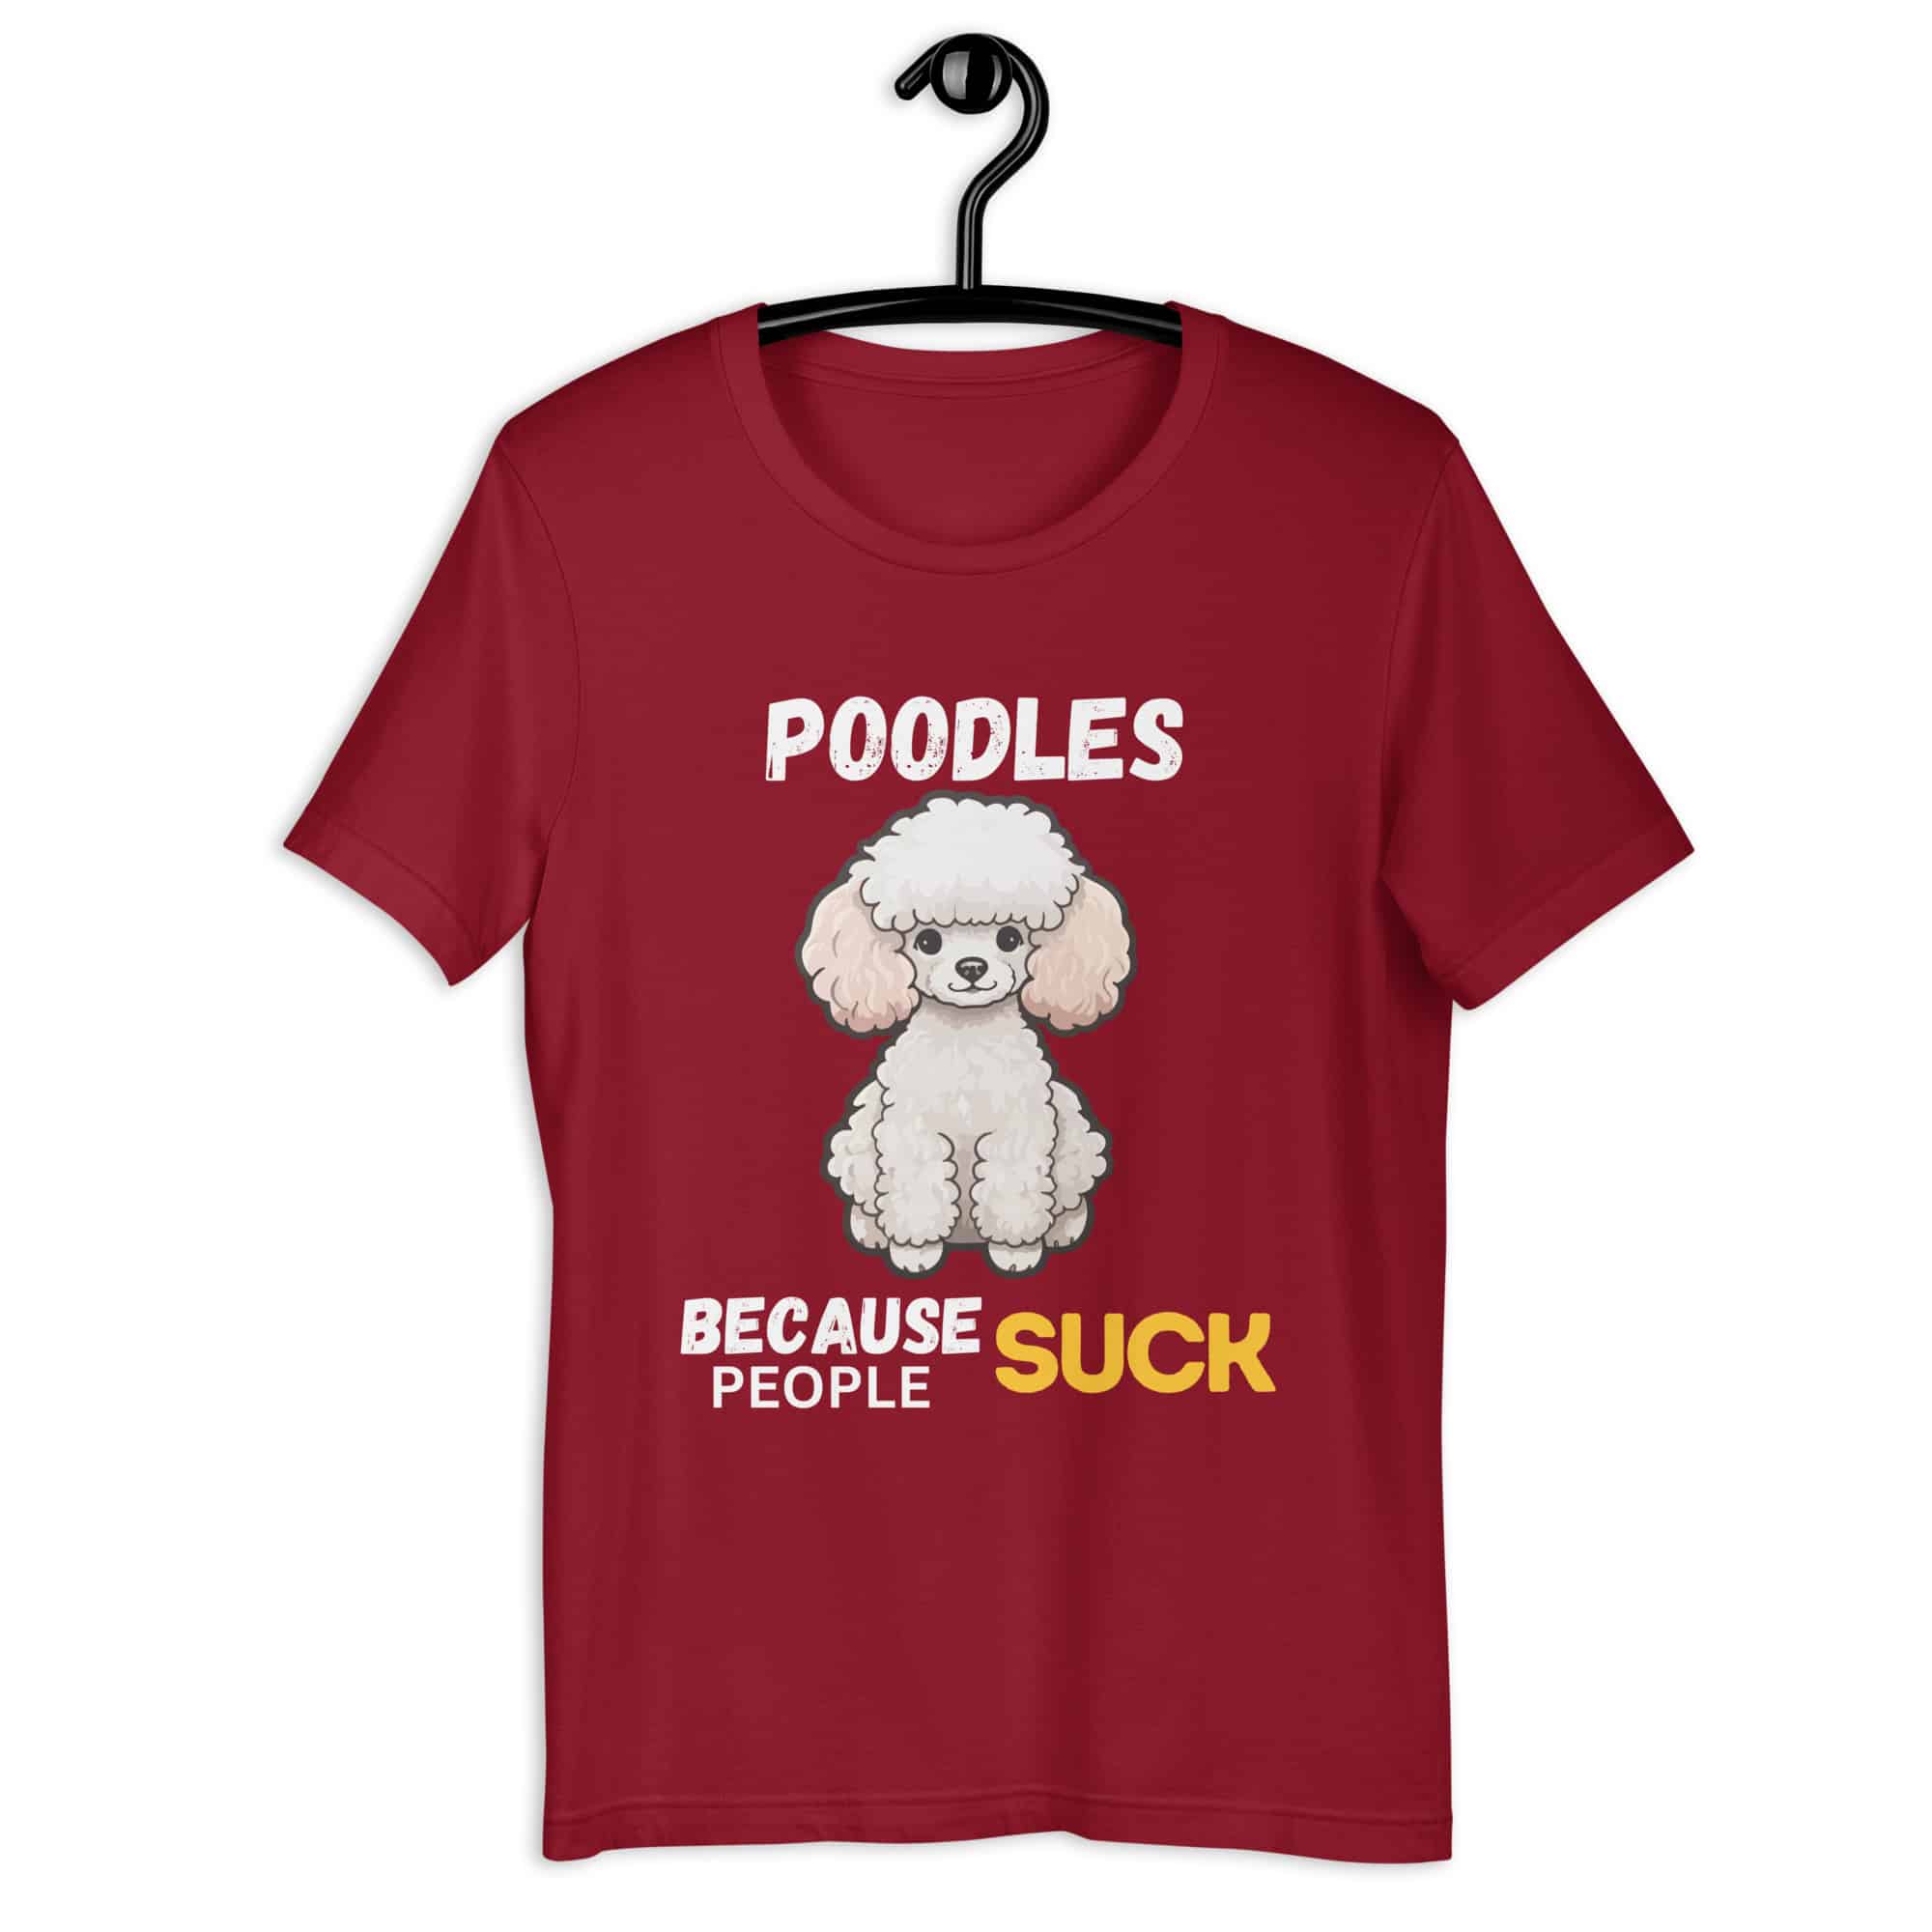 Poodles Because People Suck Unisex T-Shirt maroon